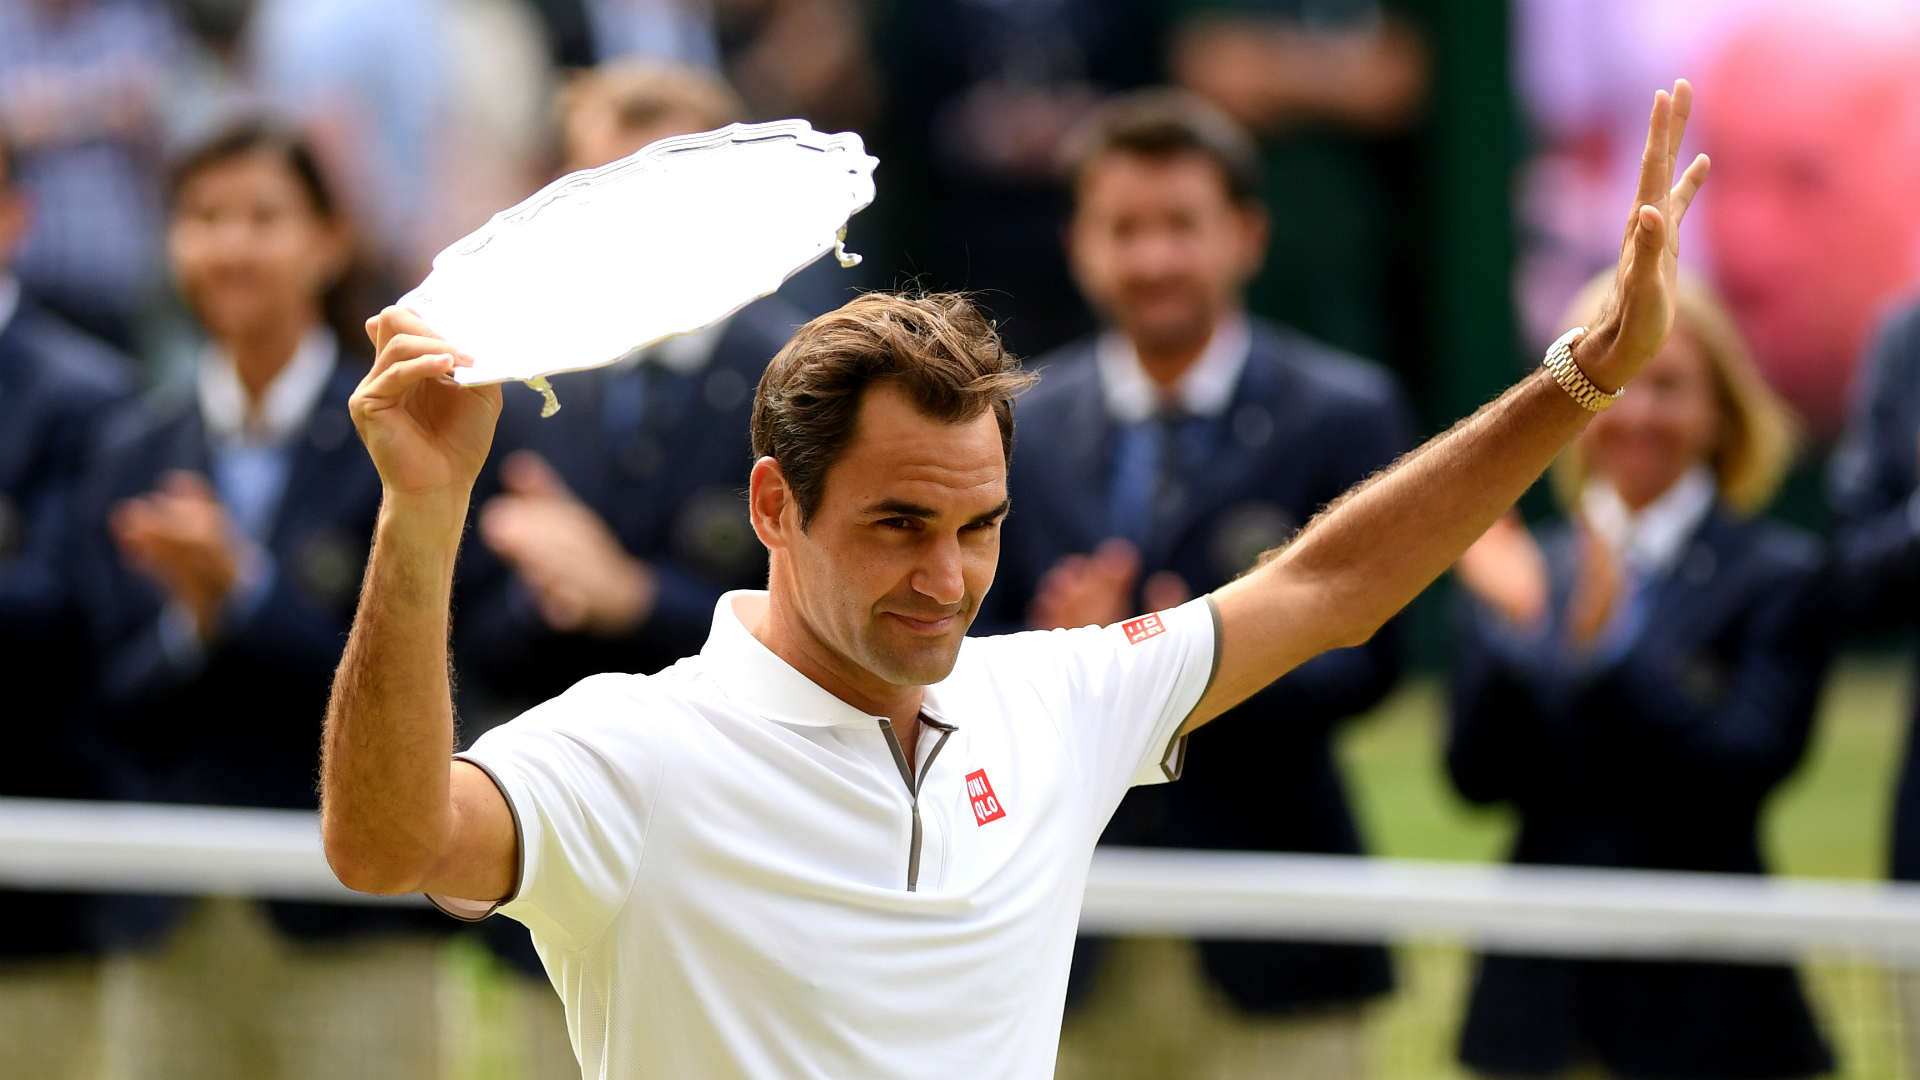 Flipboard: Wimbledon 2019 Results: Men's Final Score and Early US Open Predictions1920 x 1080